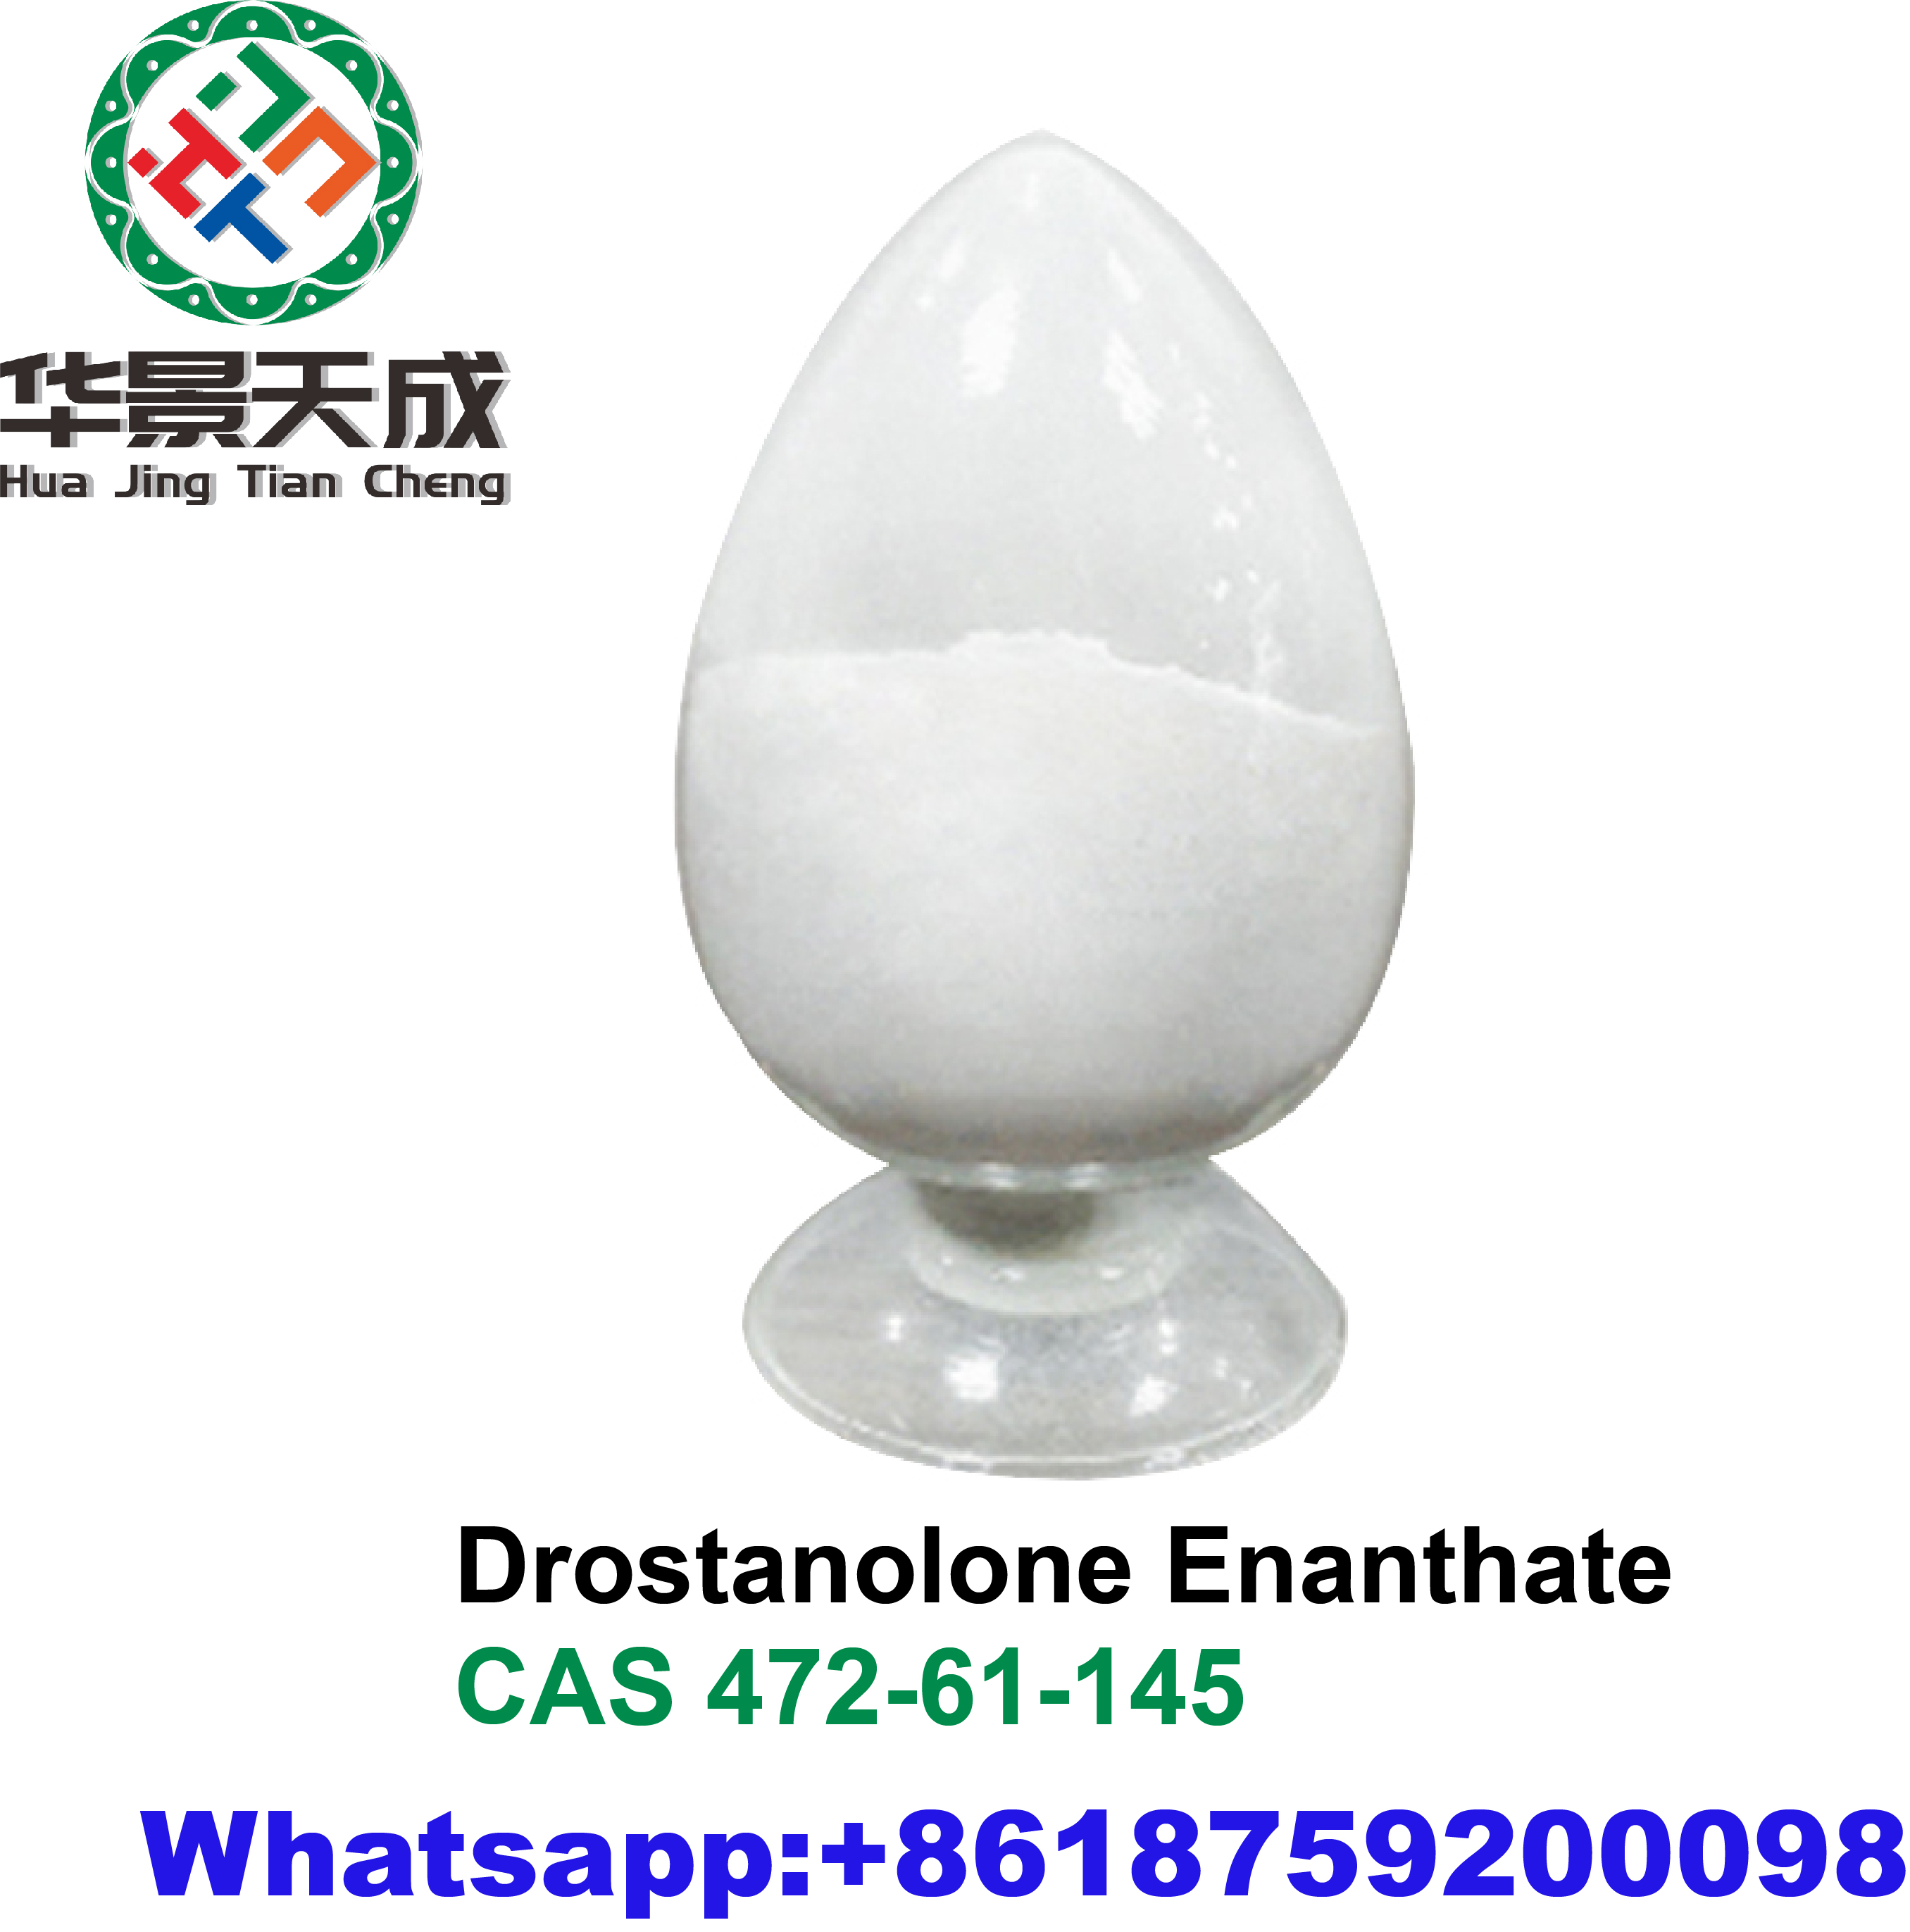 Drostanolone Enanthate3